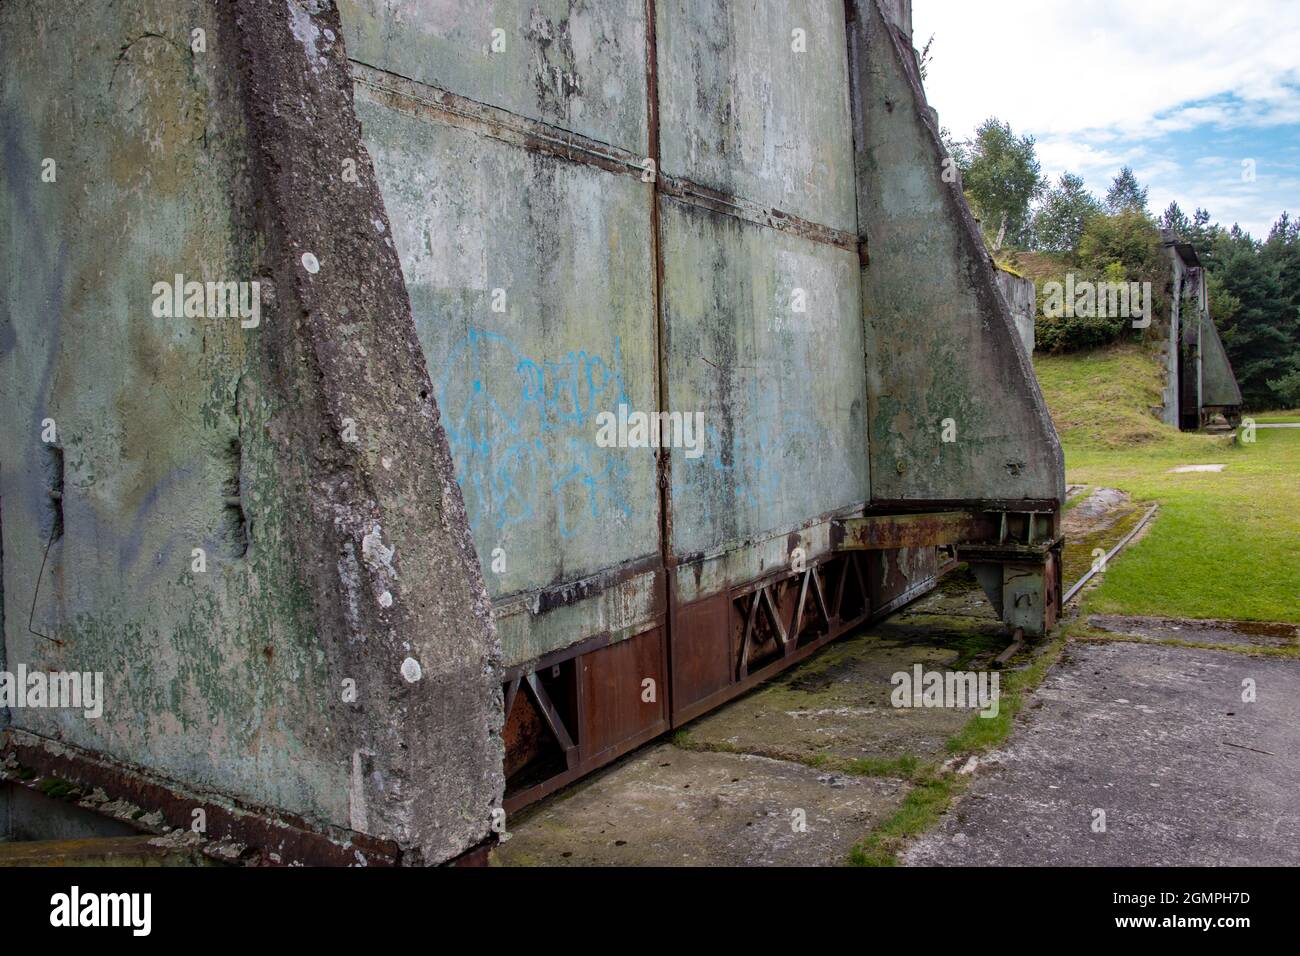 The gate of a hangars at a former military airport in northern Czech republic, used by the Soviet army. Stock Photo